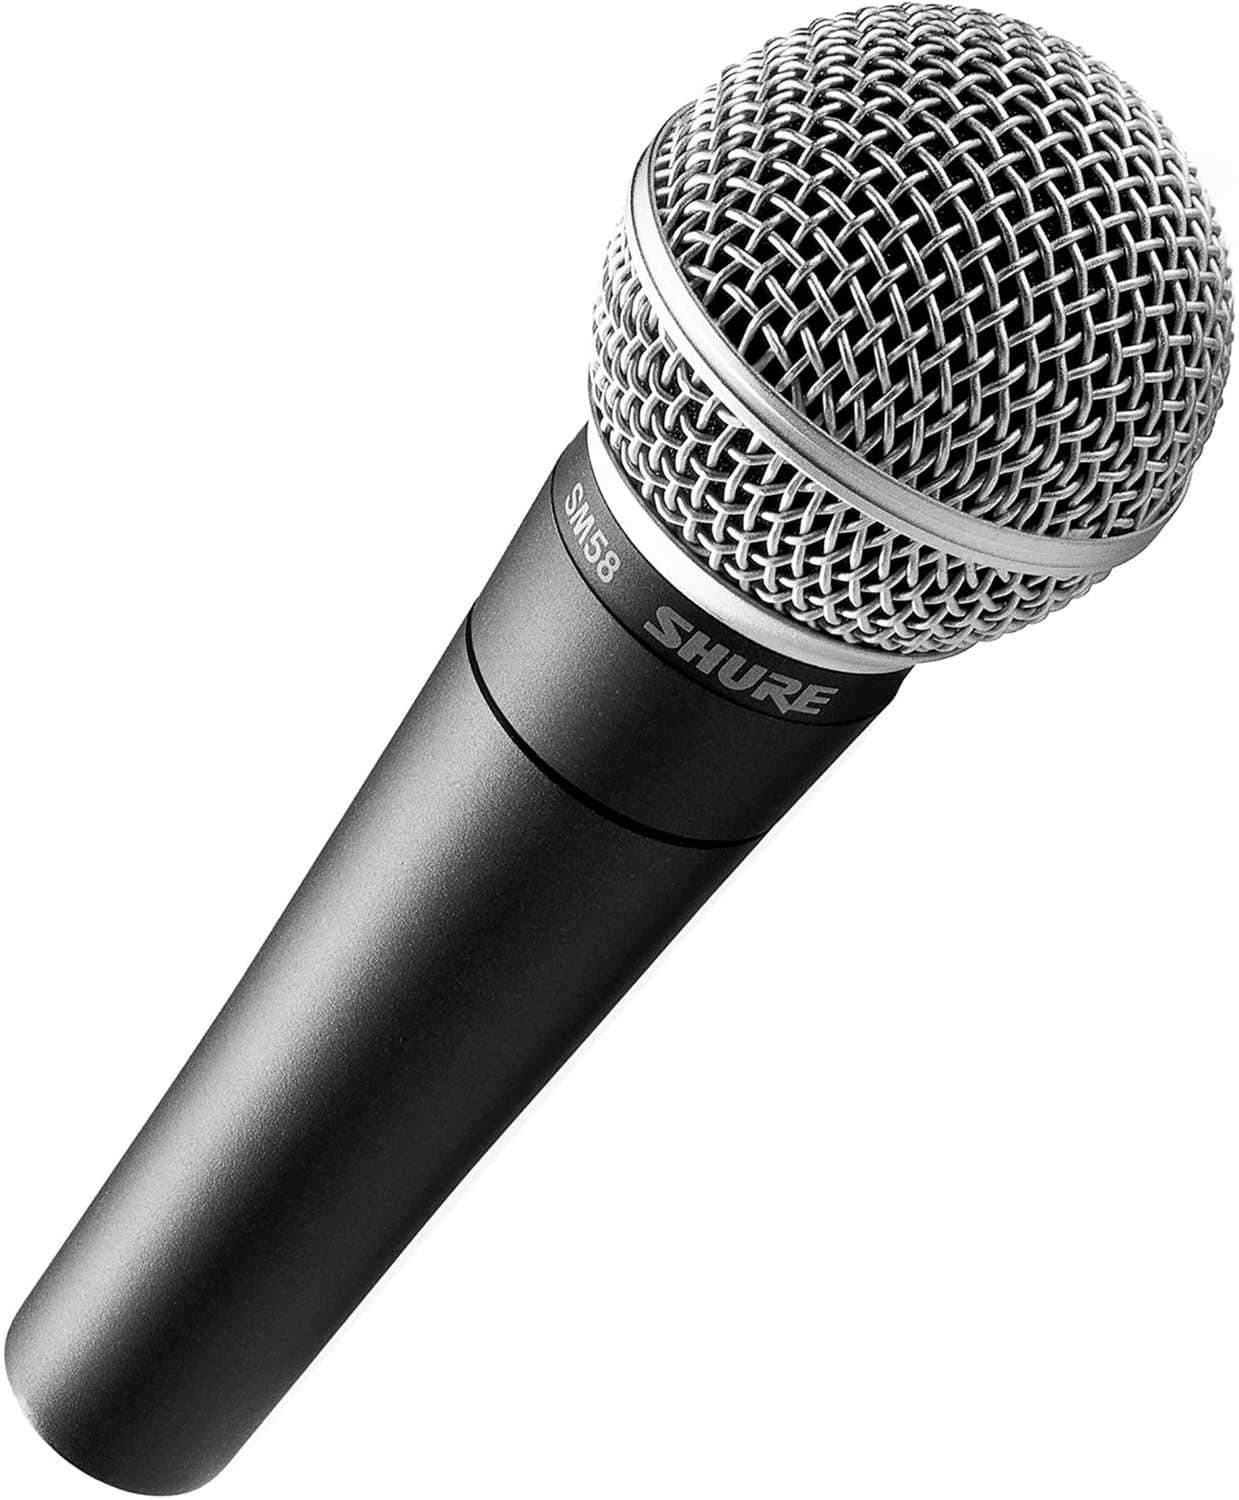 Shure SM58 Cardioid Dynamic Vocal Microphone 16-Pack - ProSound and Stage Lighting